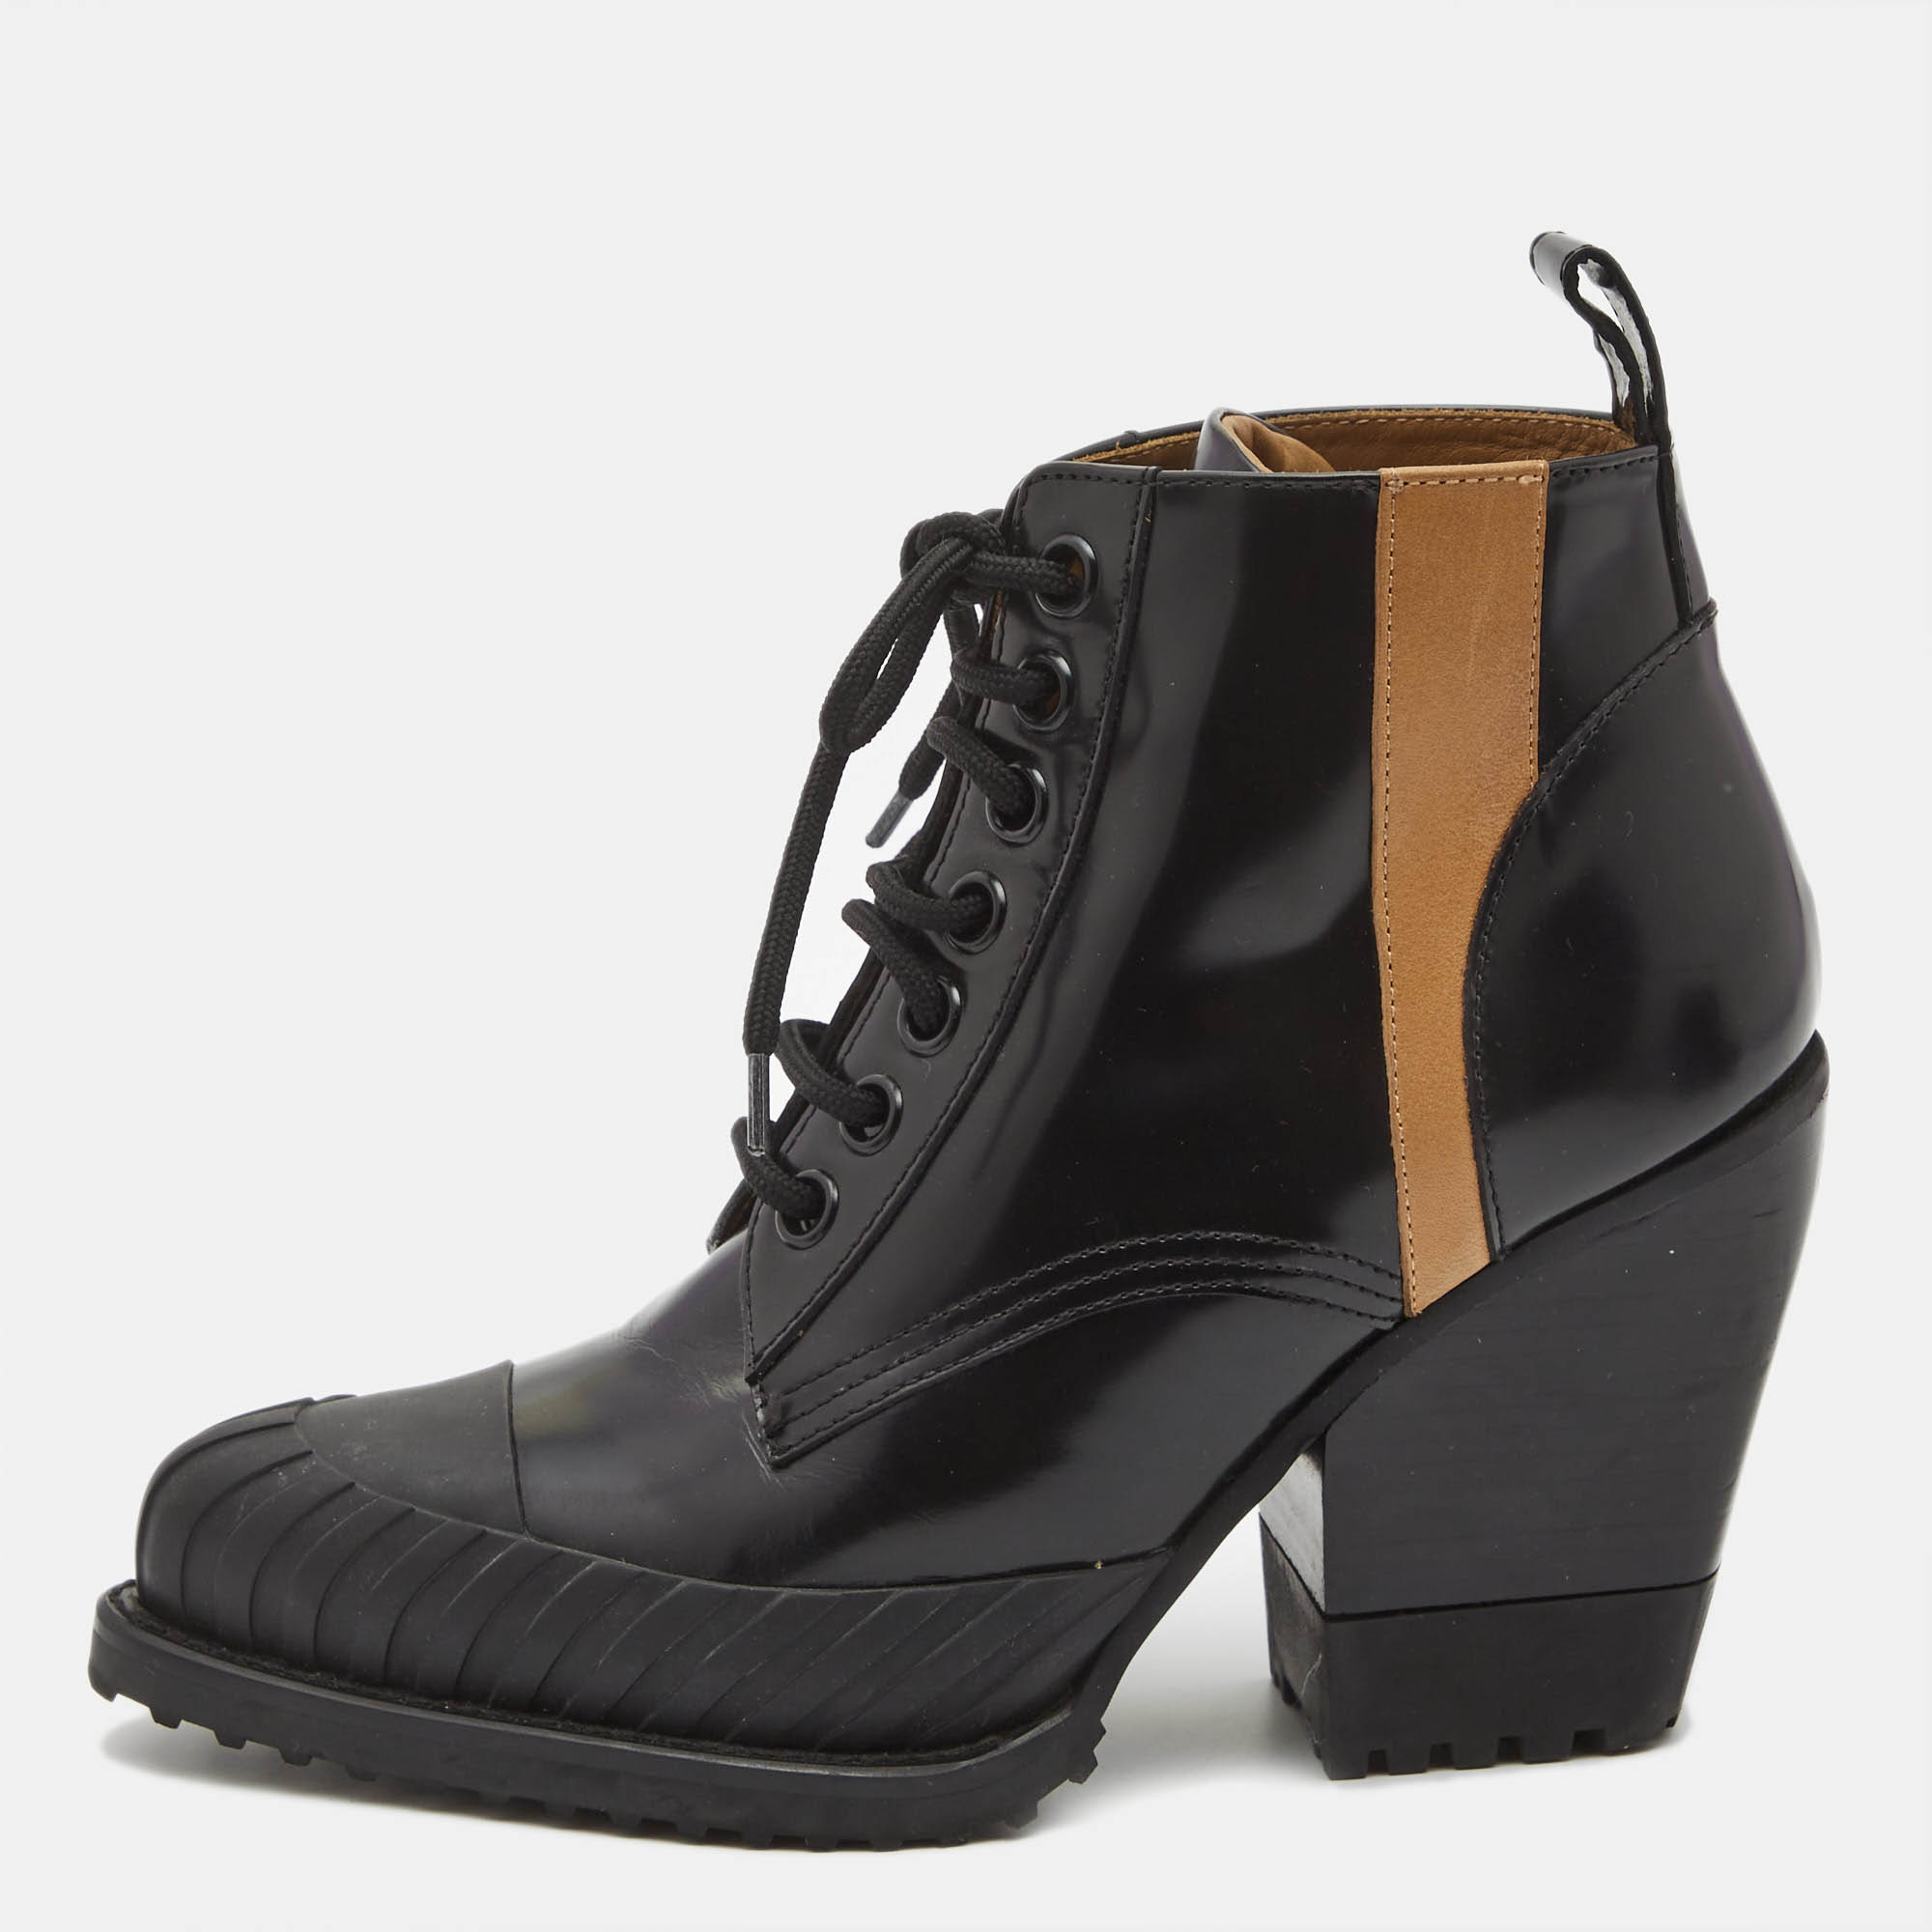 

Chloe Black Leather Rylee Cap Toe Ankle Boots Size